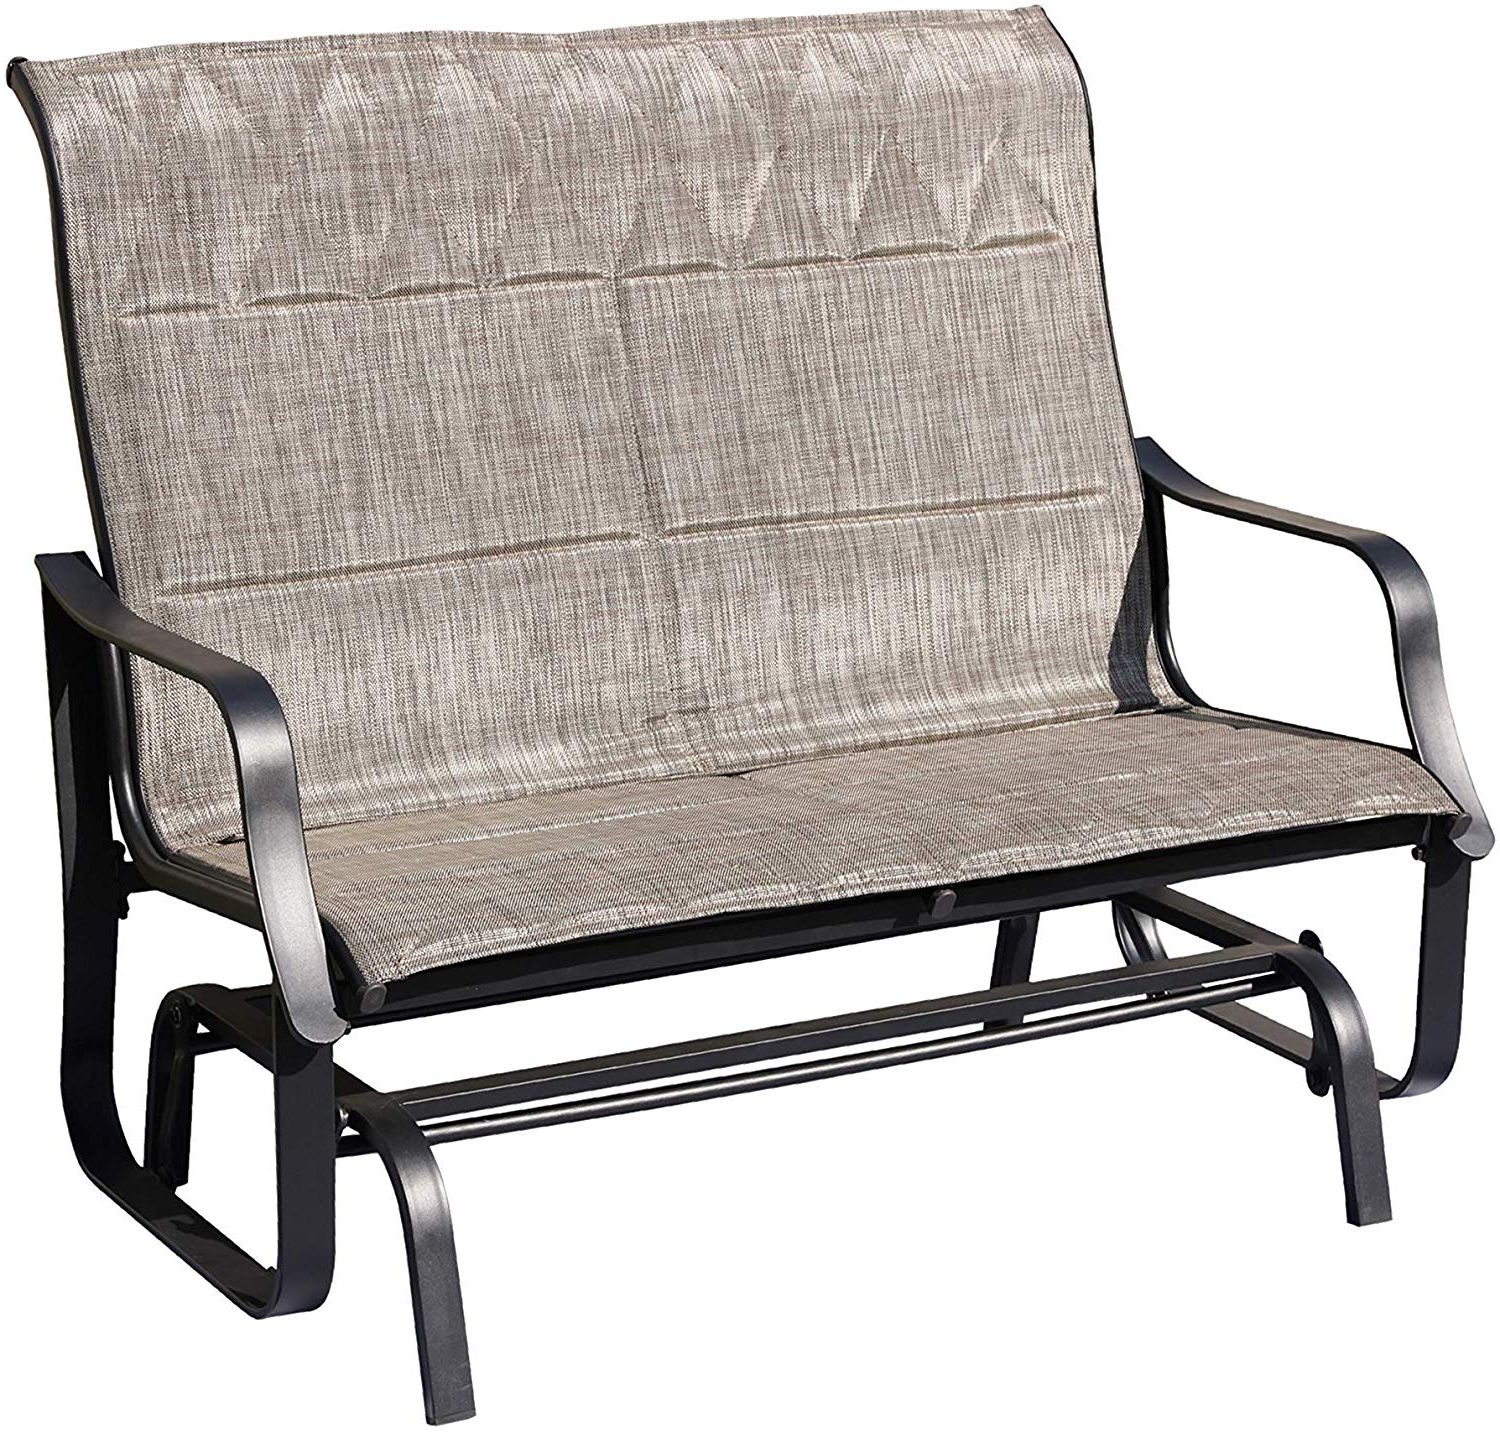 Recent Top Space Outdoor Swing Glider Chair, Patio Bench For 2 Person,garden  Loveseat,rocking Seating (1 Pc, Grey) For Outdoor Patio Swing Glider Benches (View 2 of 30)